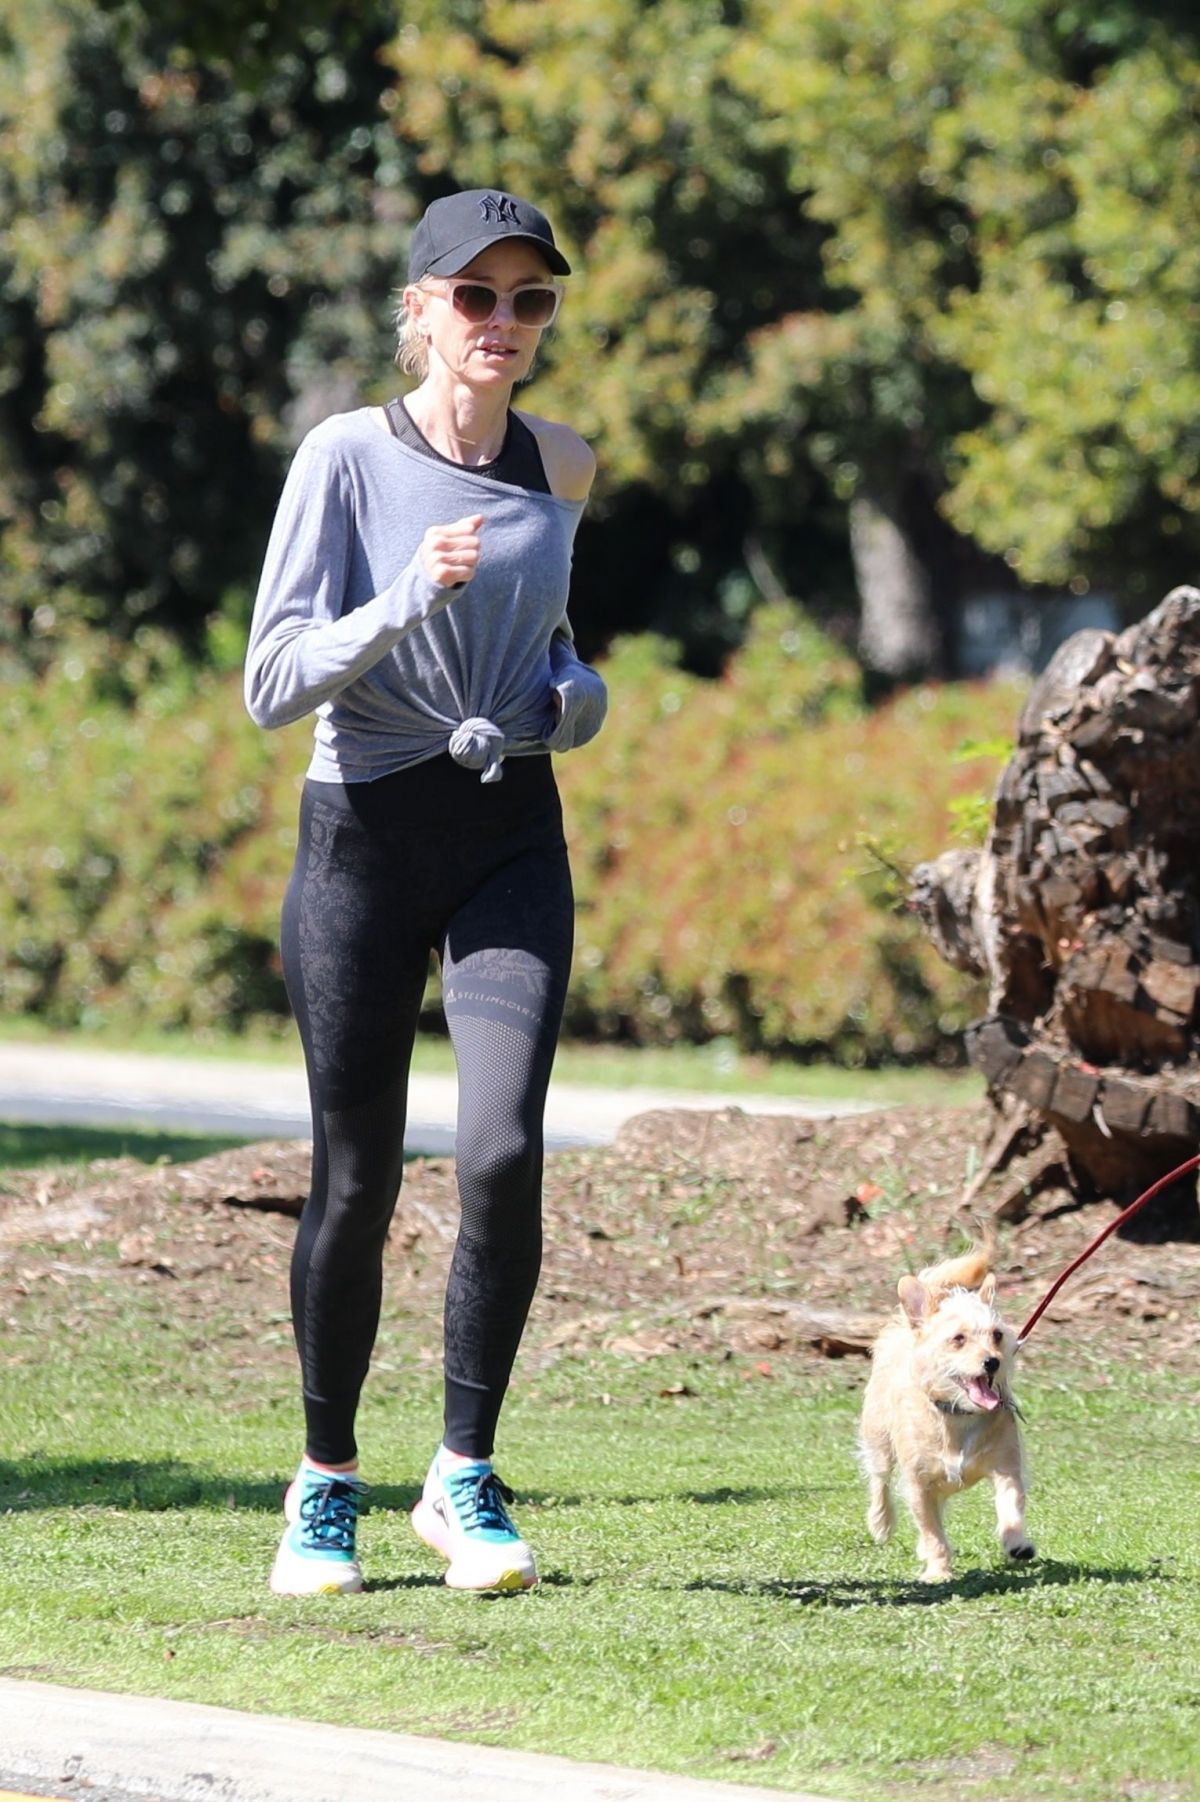 NAOMI WATTS and Liev Schreiber Out Jogging During Break from Quarantine ...